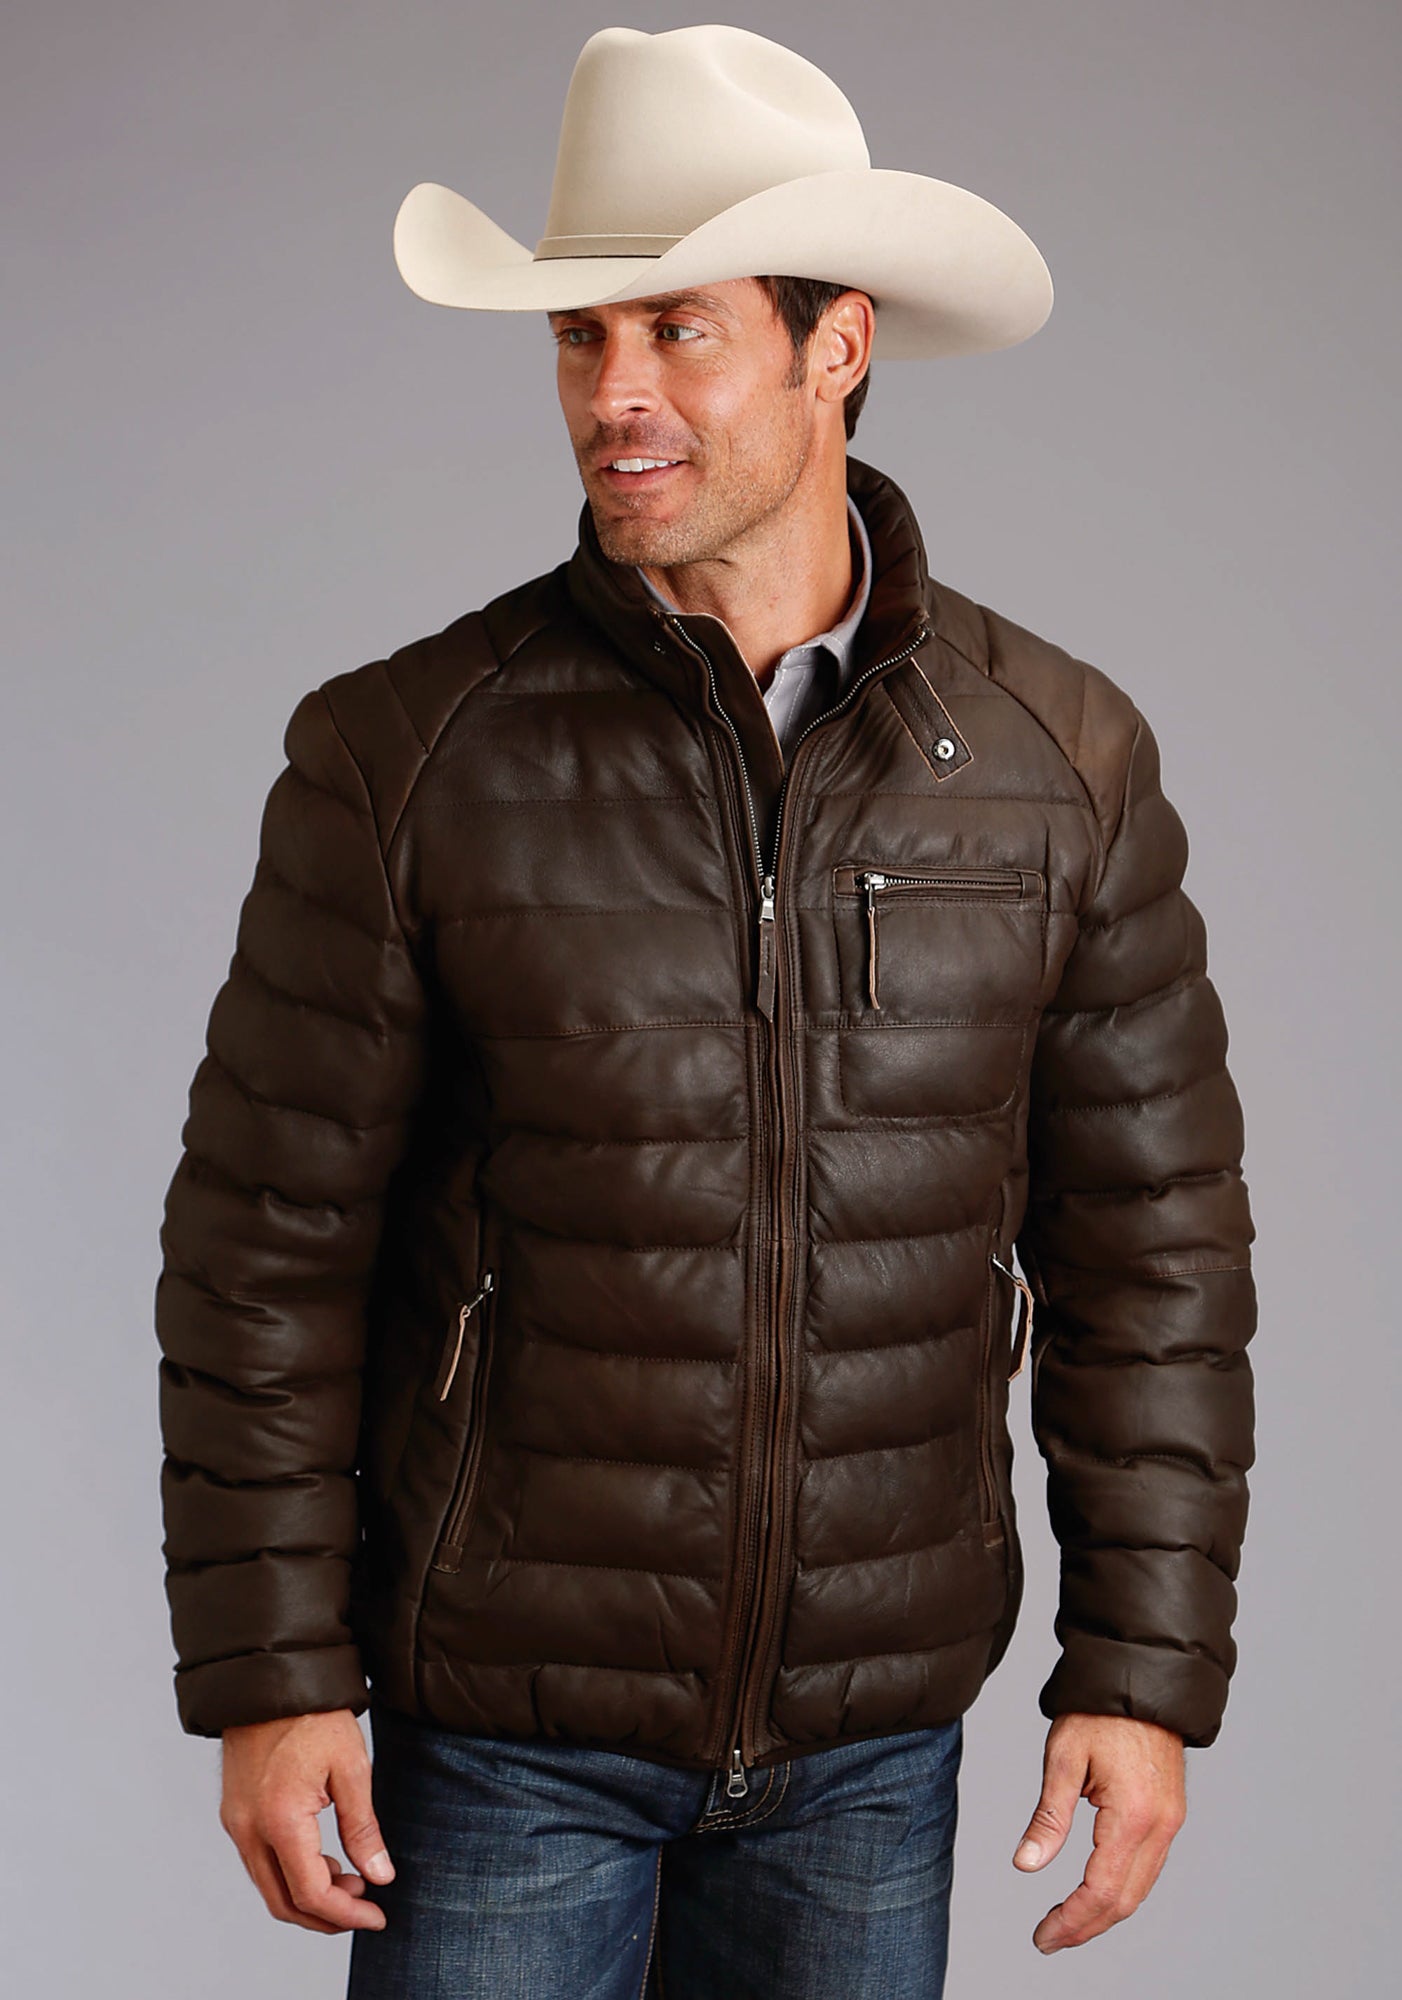 Stetson Mens Dark Brown Leather Puffy Jacket – The Western Company